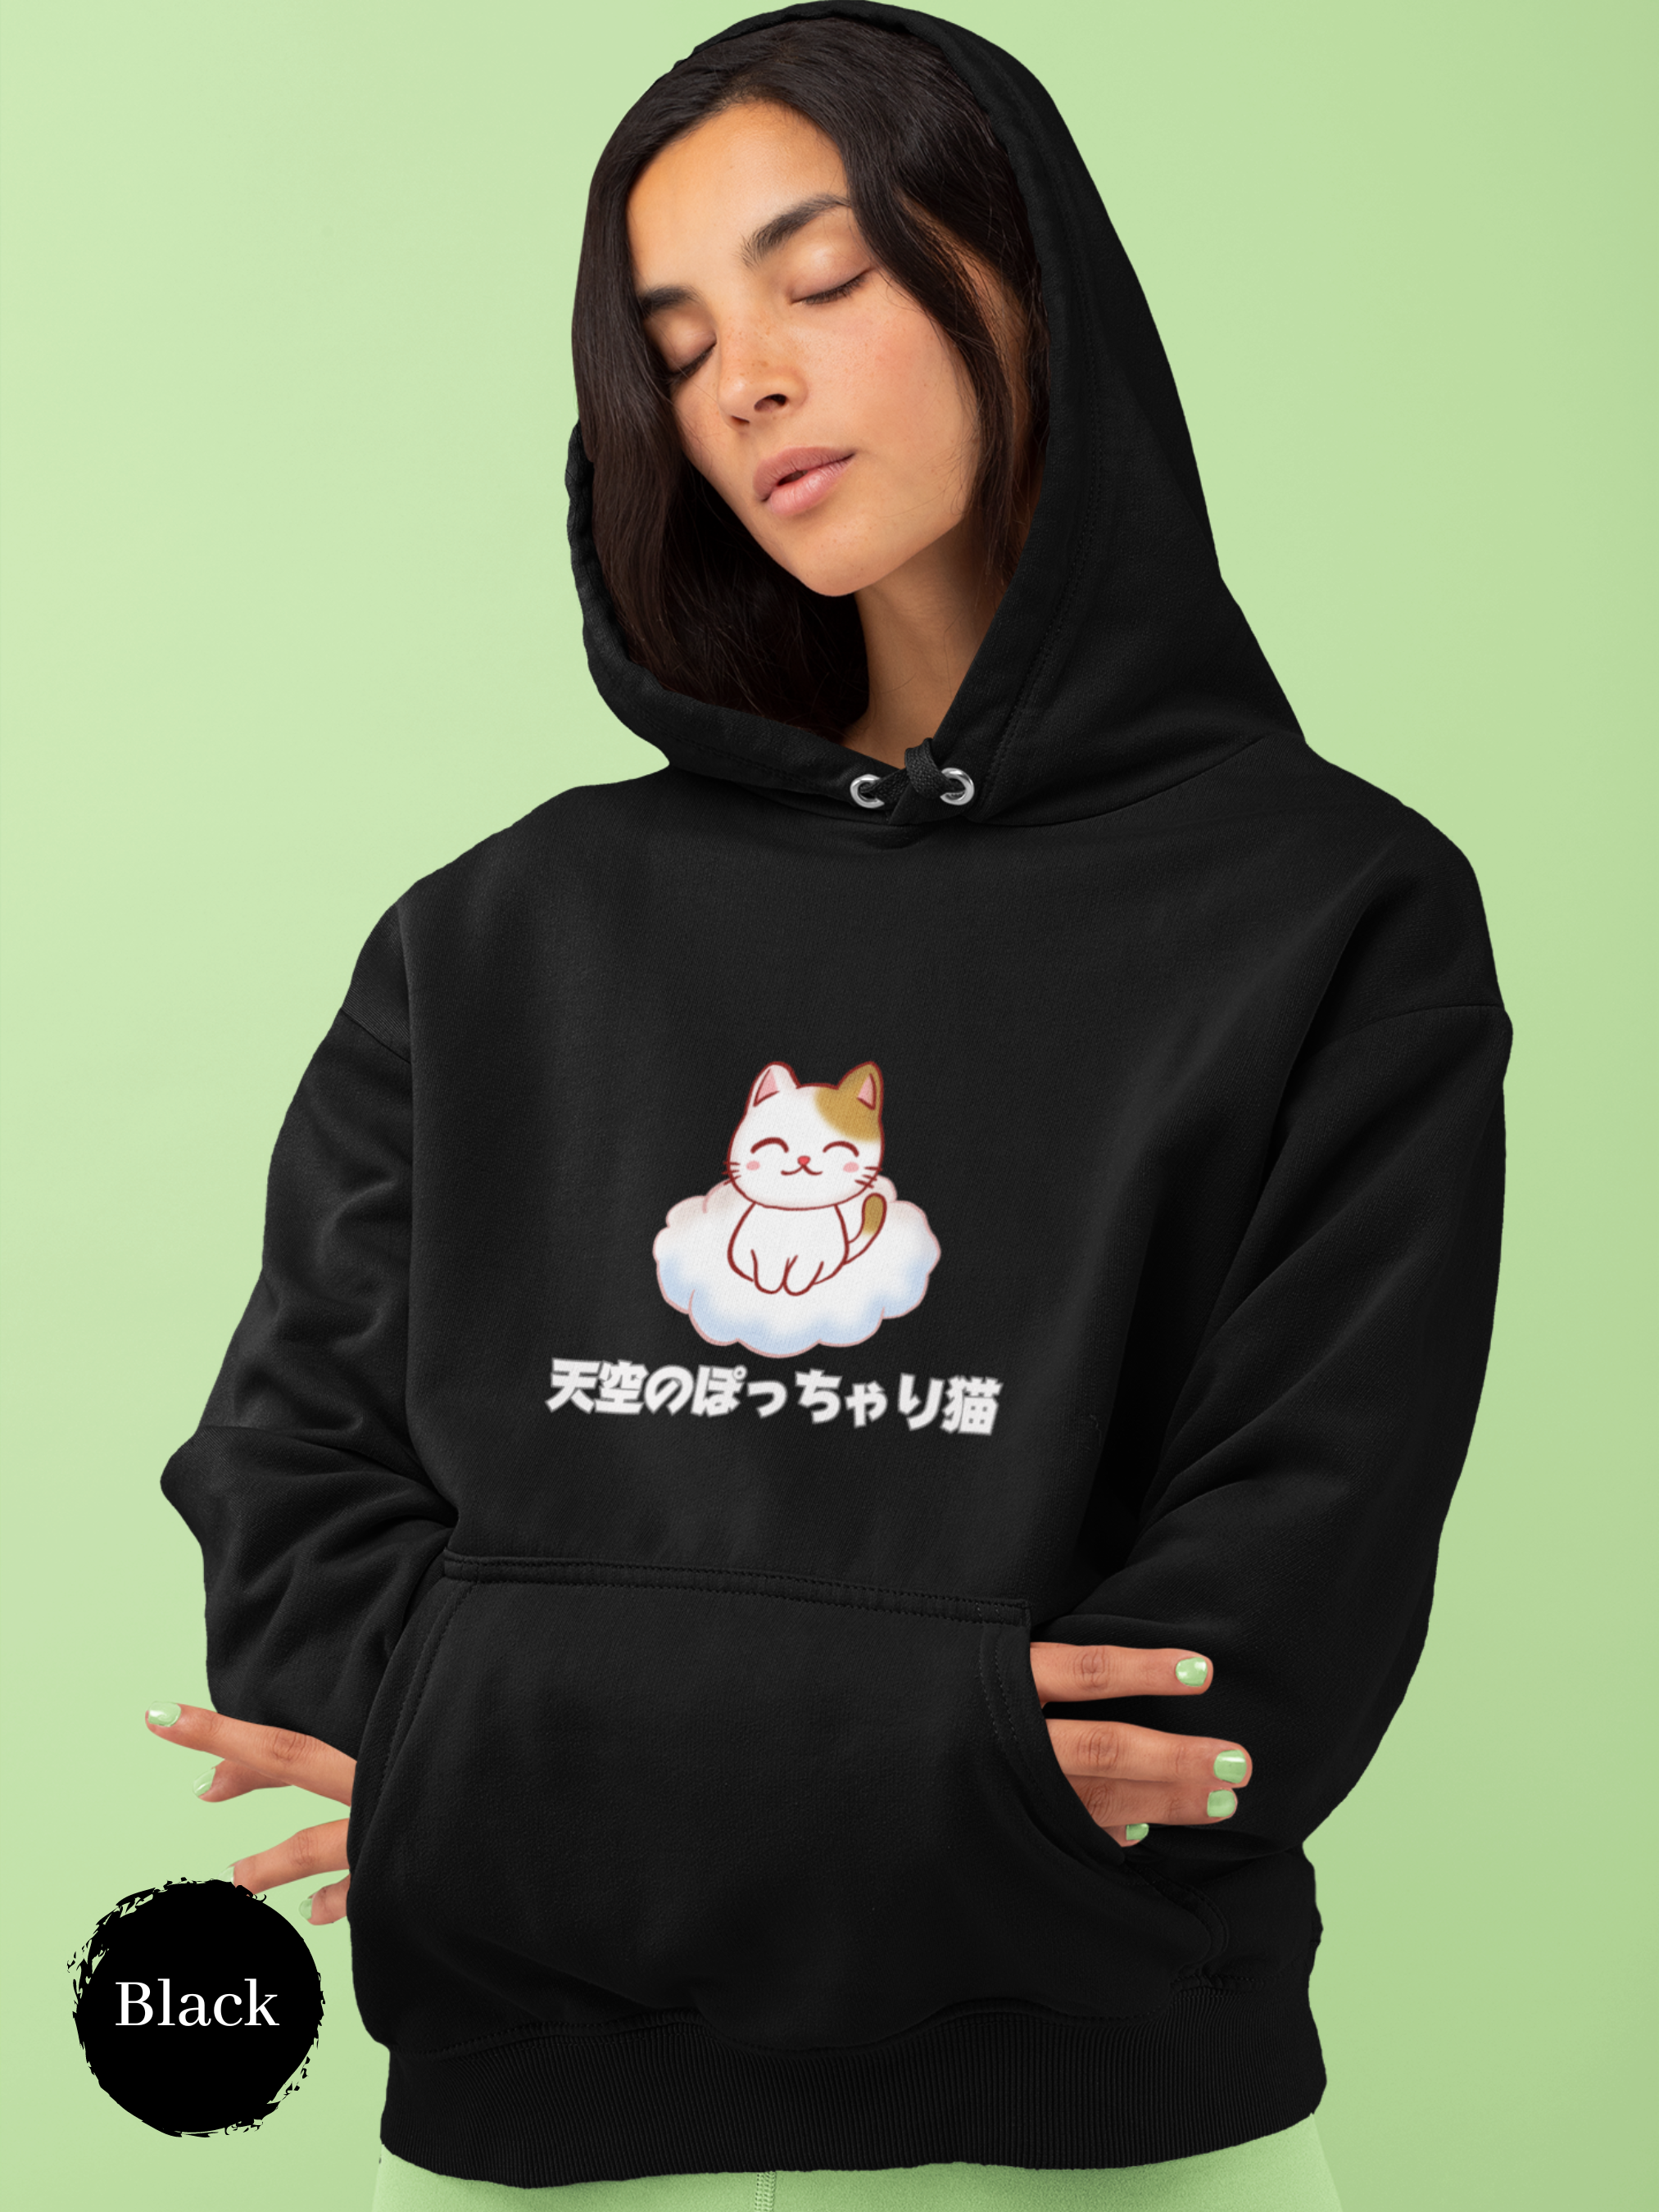 Cat Hoodie: Heavenly Chubby Cat on Cloud - Whimsical Cat Art Sweatshirt for Feline Enthusiasts and Pun Lovers